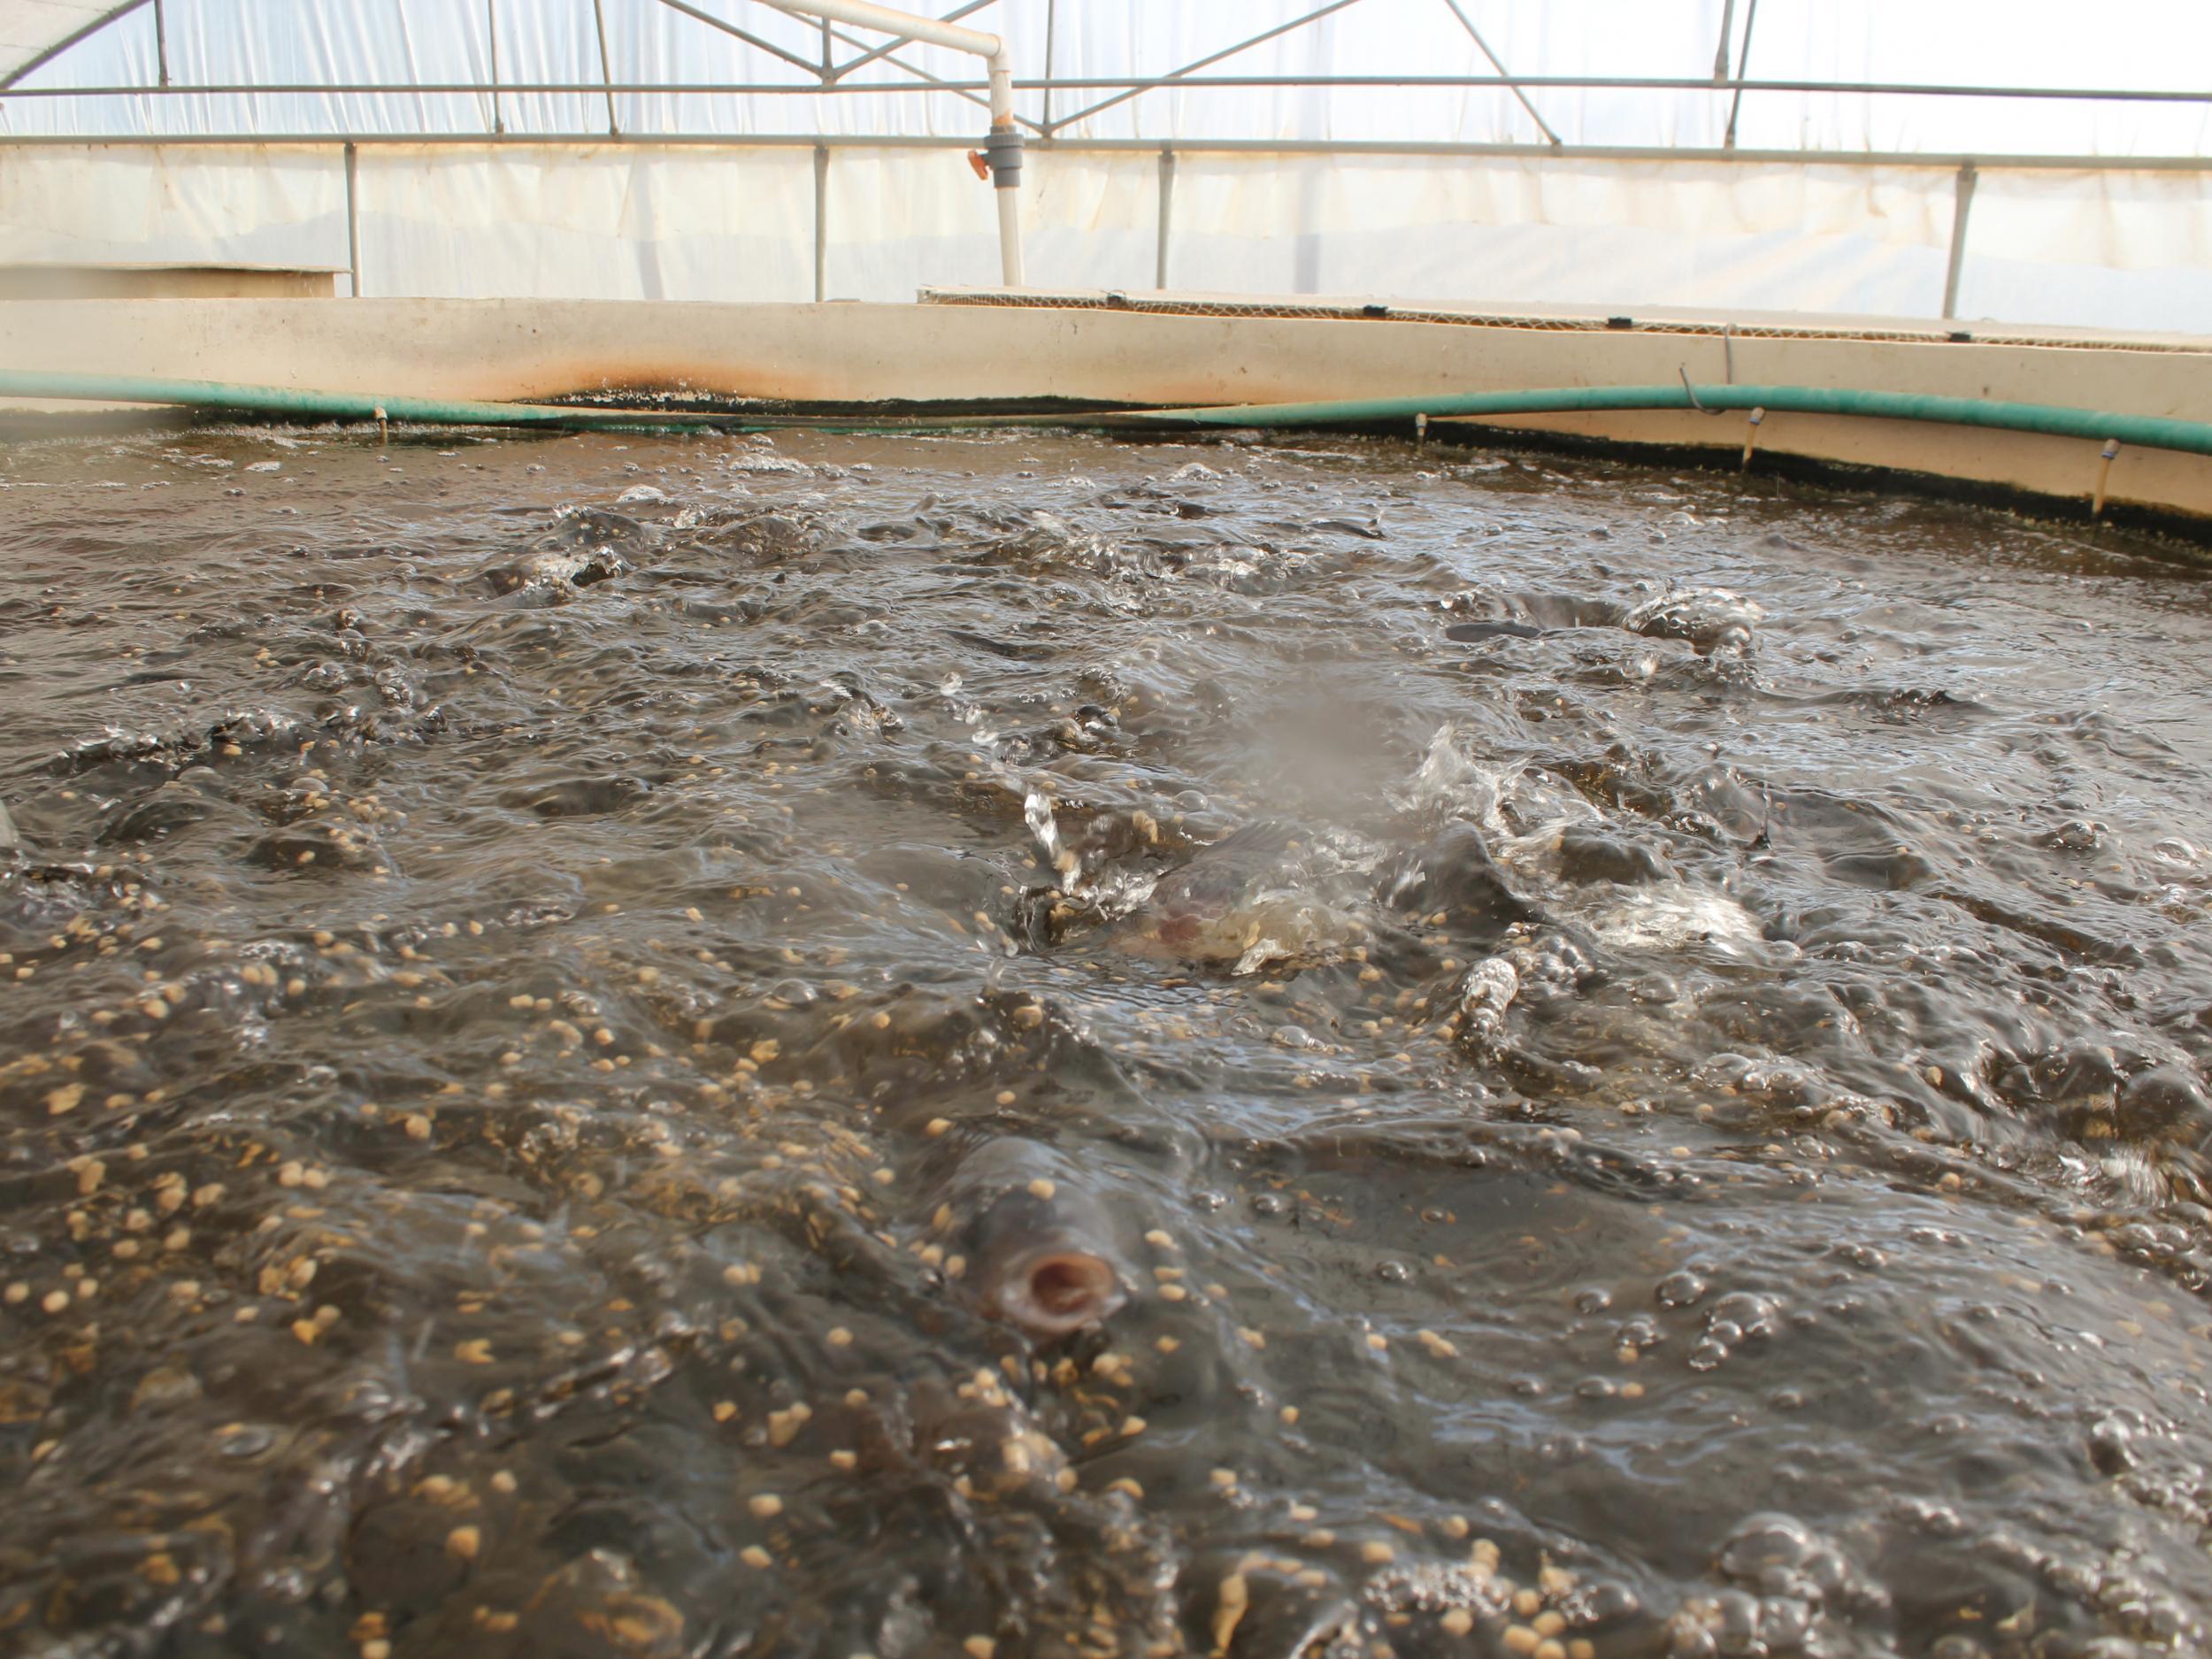 This is the first major aquaponics farm in Egypt, a system whereby fish reared in tanks exchange water with plants grown nearby (Edmund Bower)